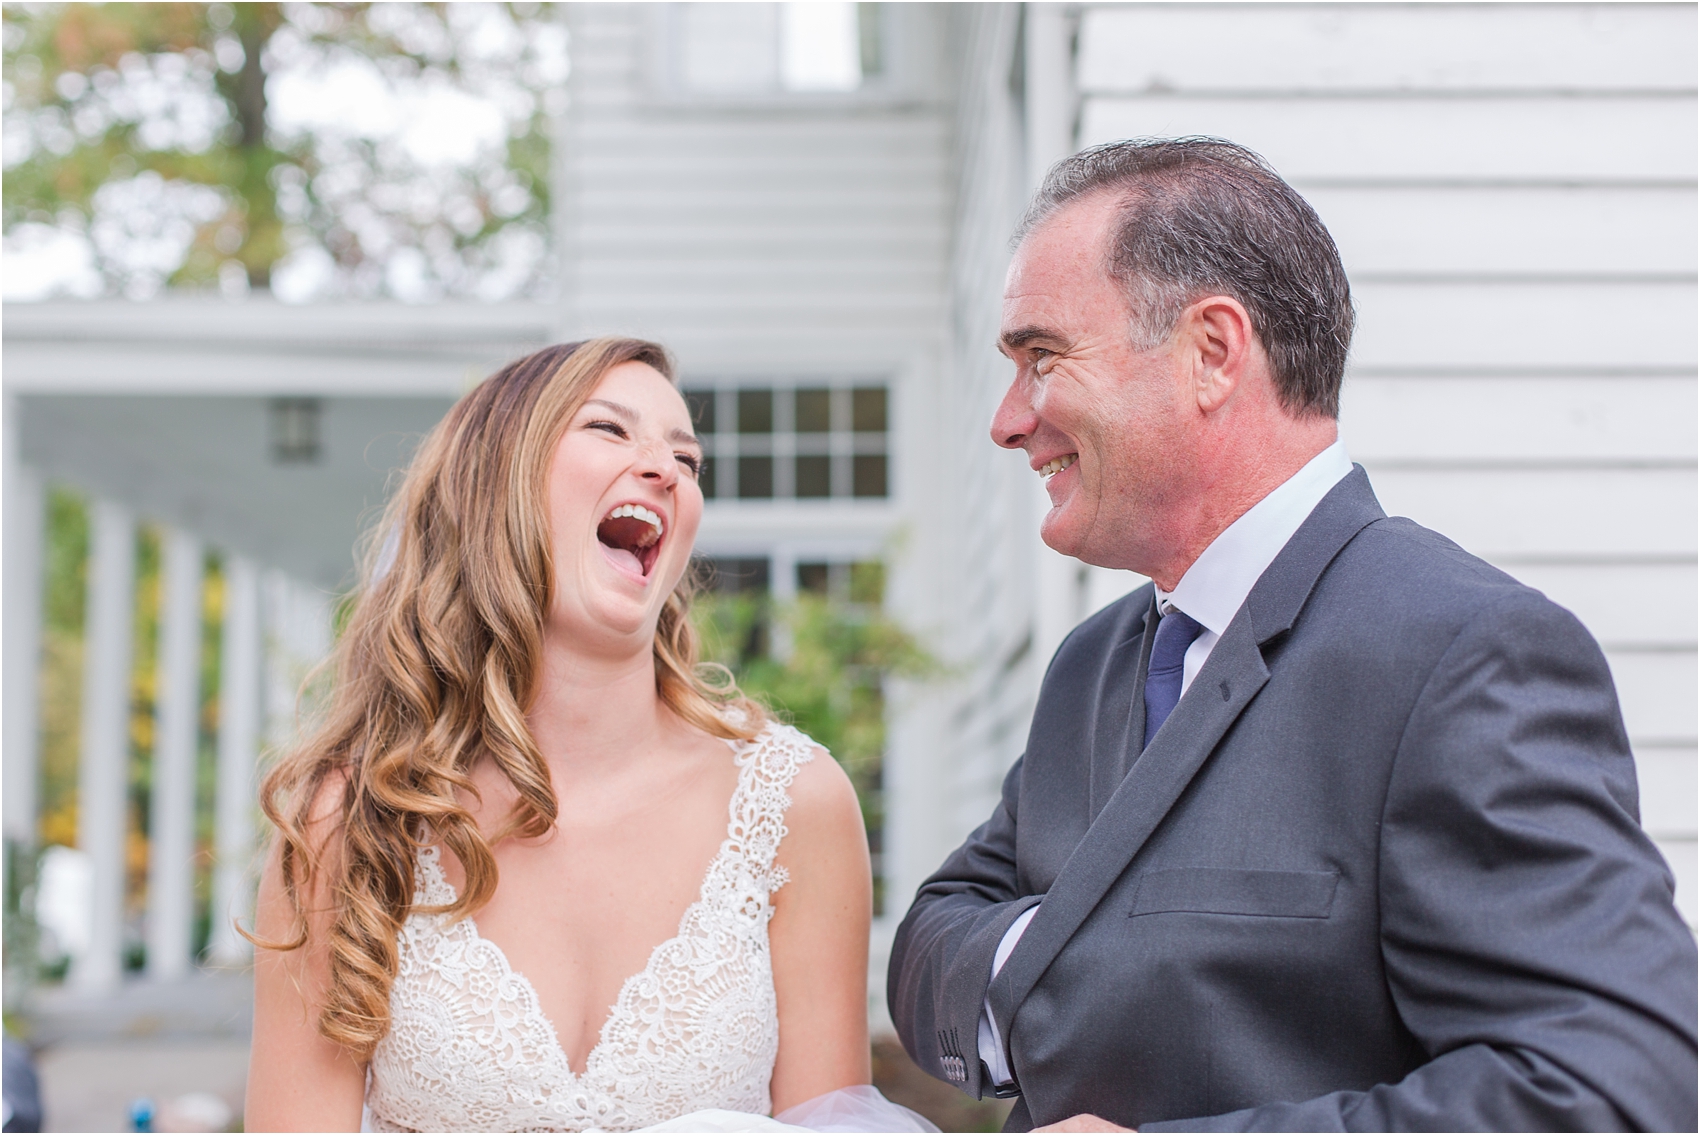 father-and-bride-share-emotional-first-look-on-wedding-day-photos-in-detroit-michigan-by-courtney-carolyn-photography_0066.jpg